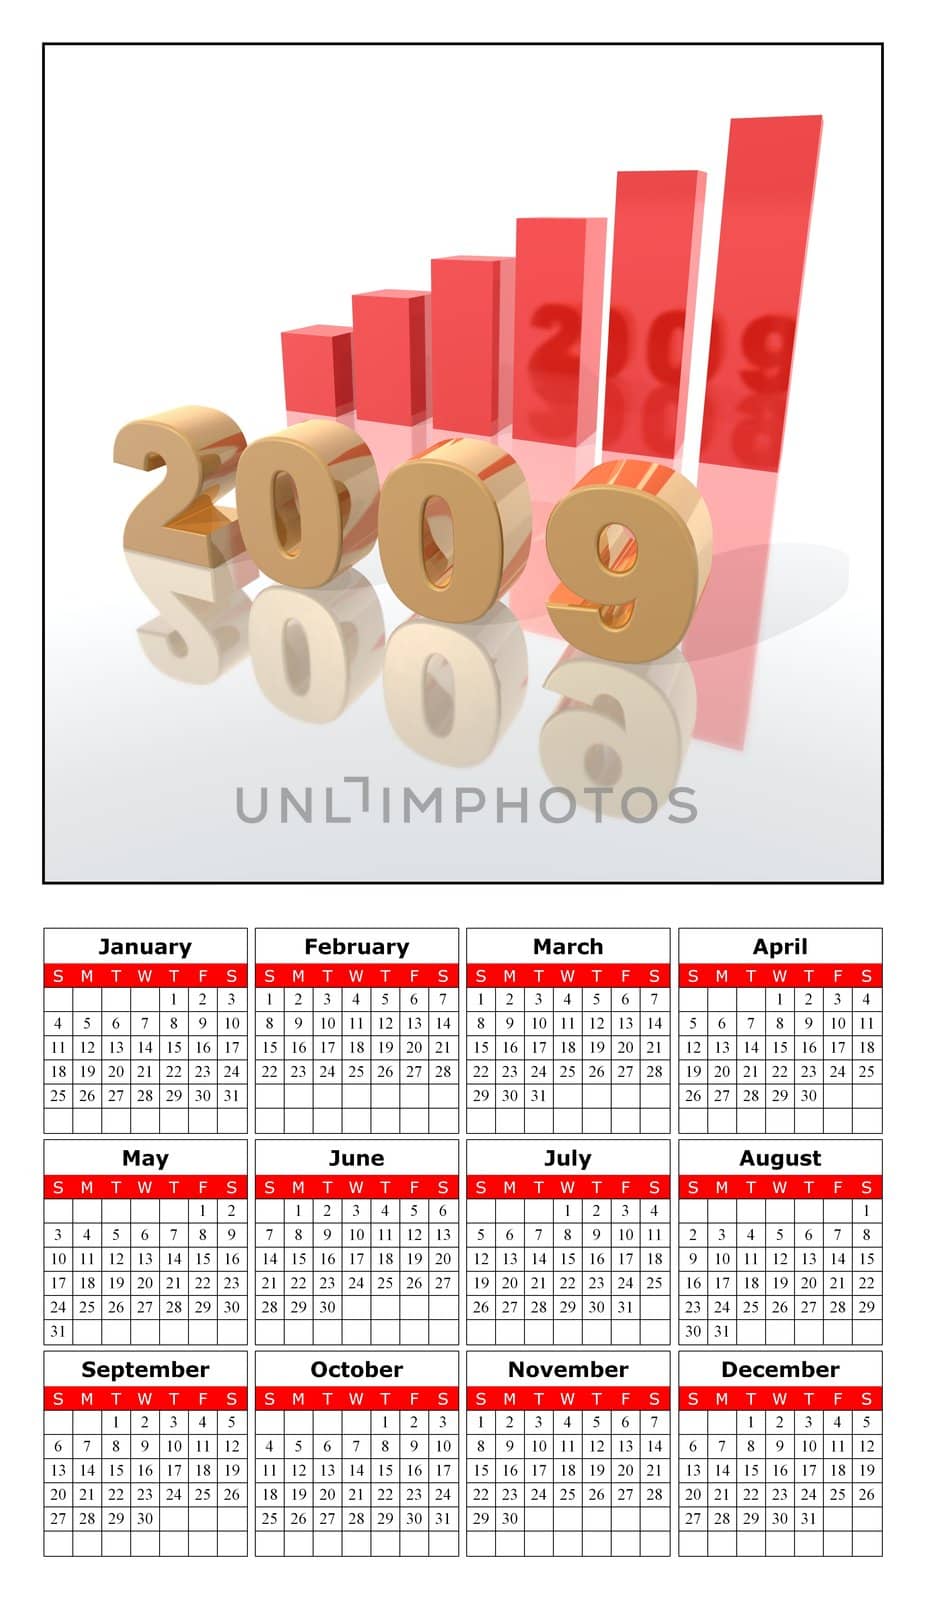 a calendar for the new year 2009